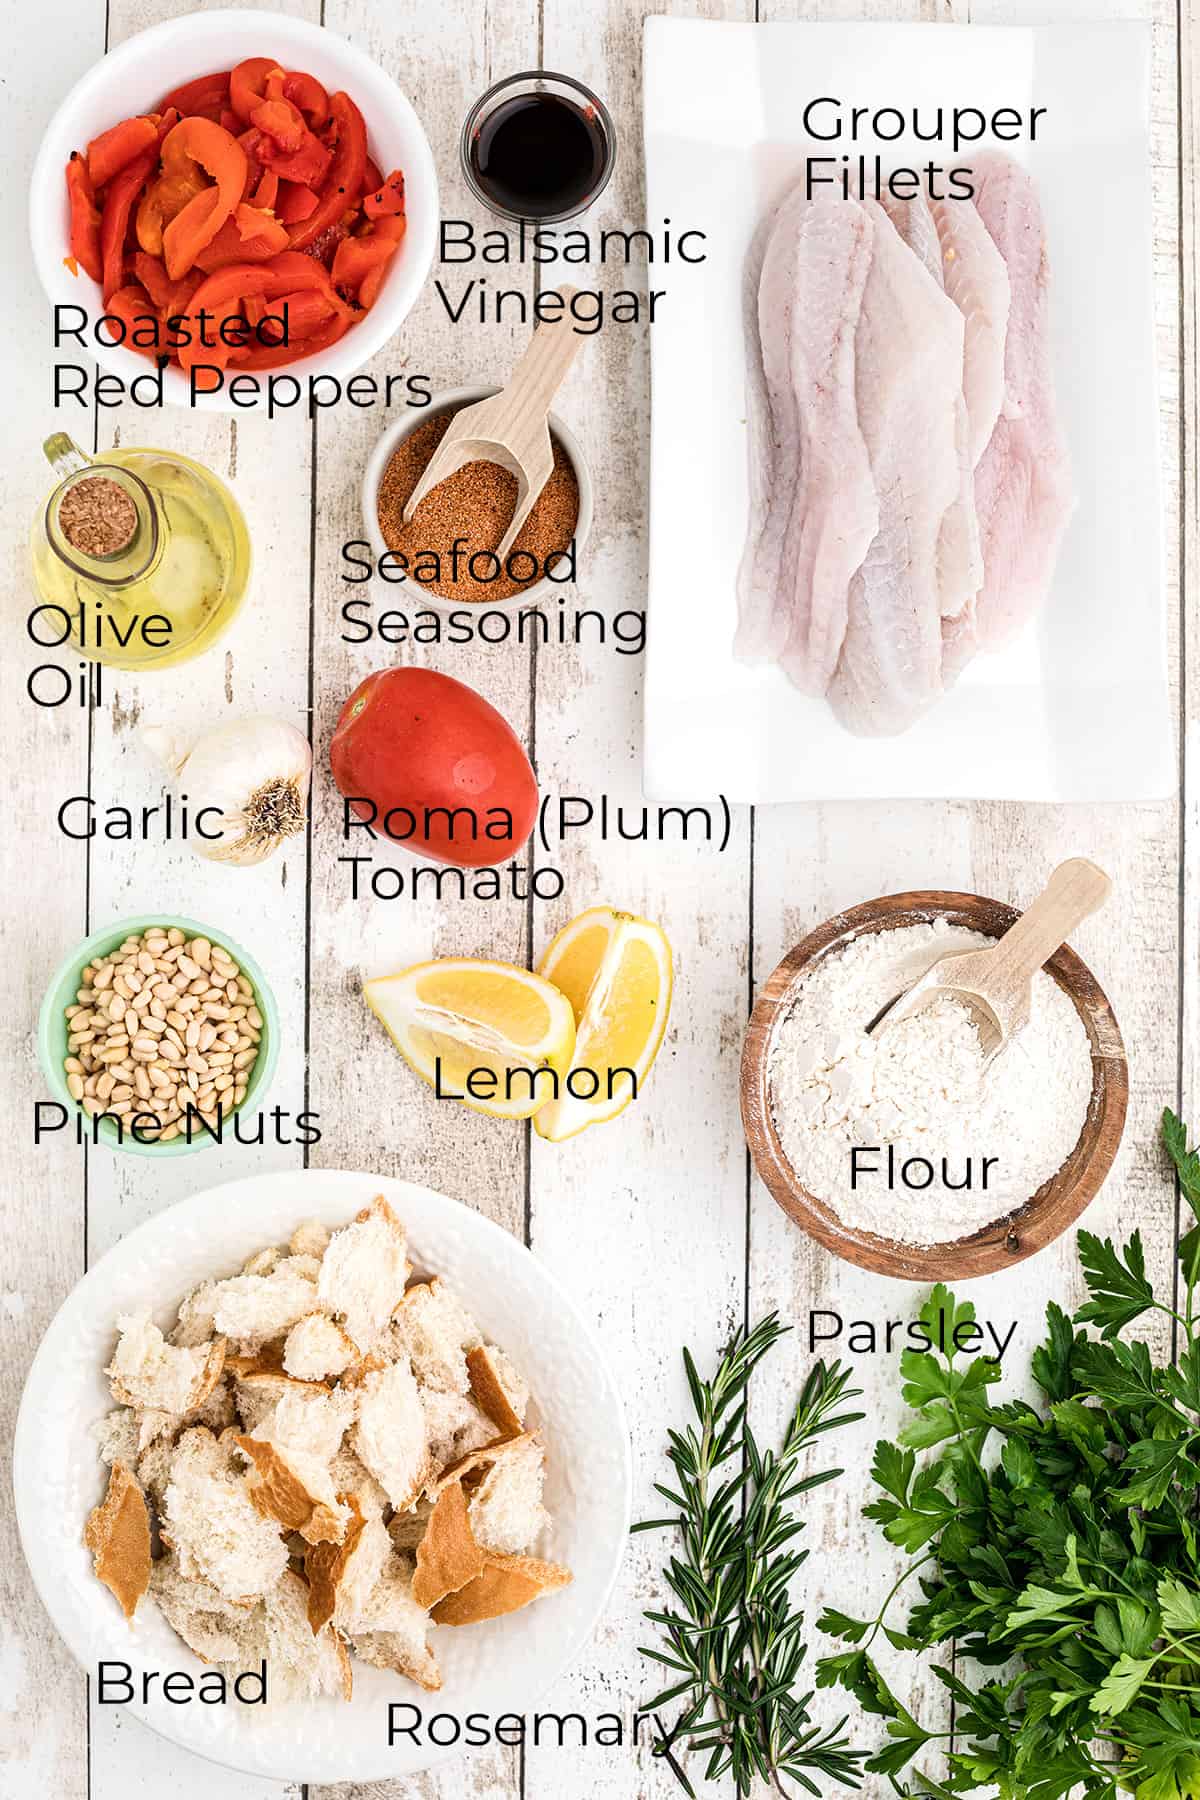 All ingredients needed to make this recipe.